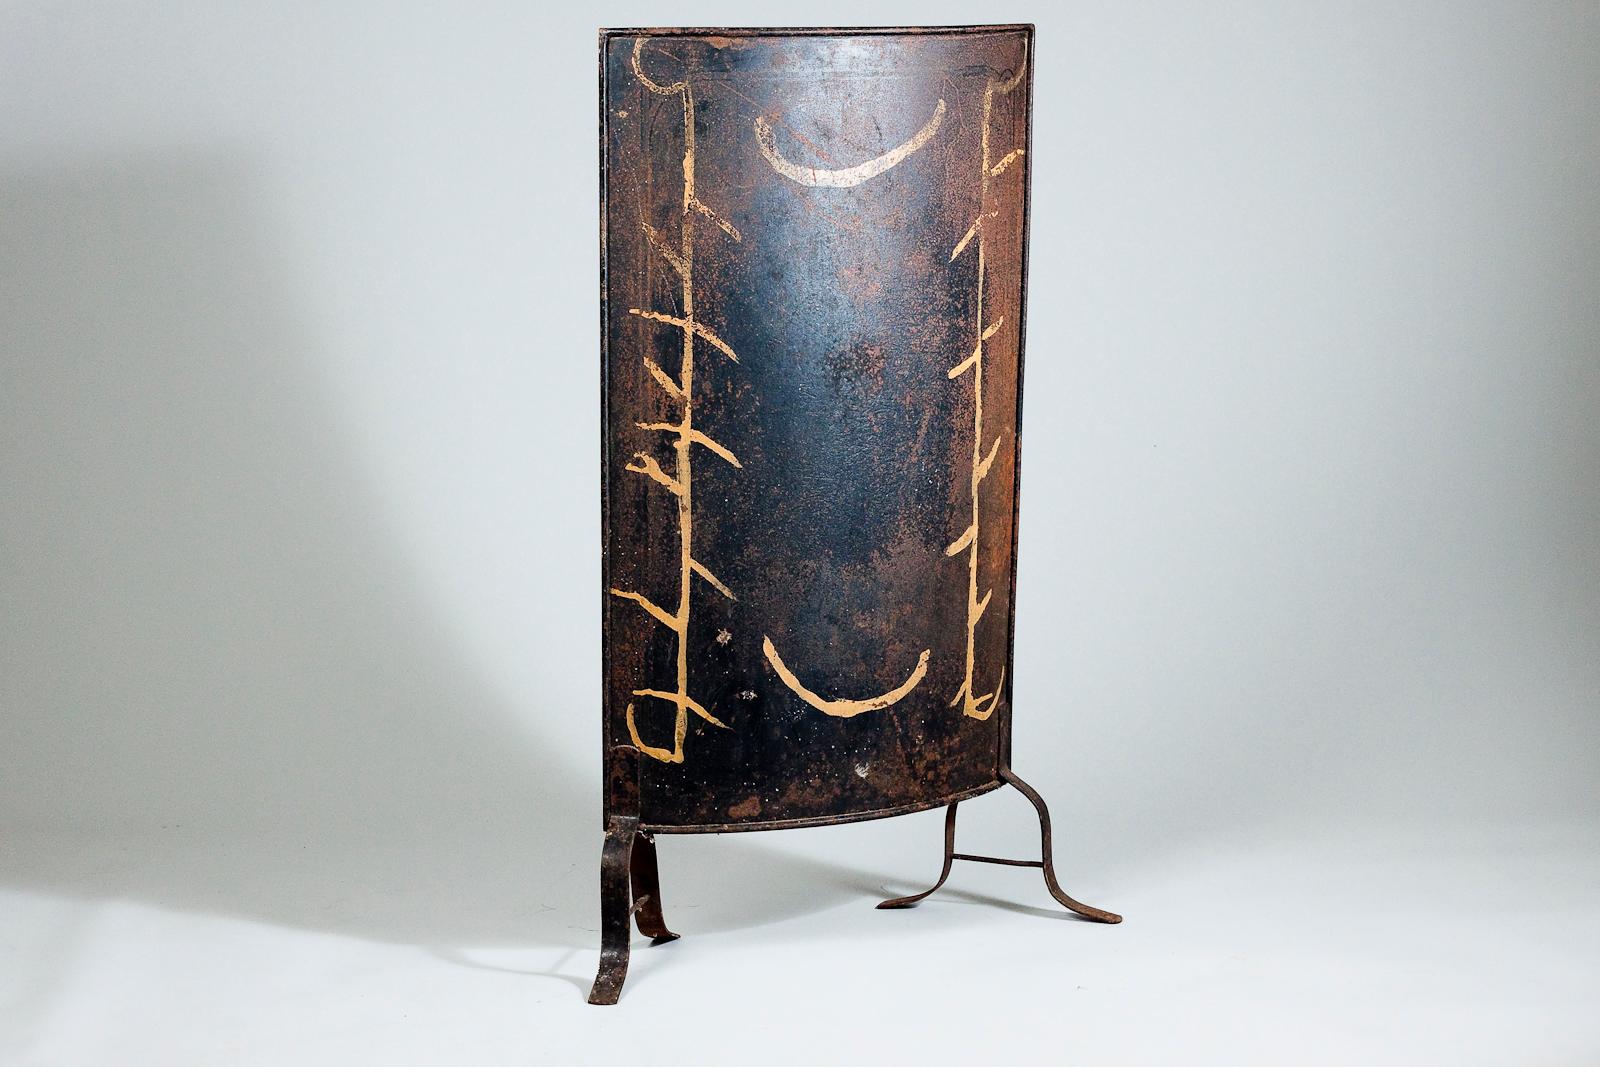 Patinated 1890s Swedish black metal fire screen / guard. Perfect for your tiled stove or any fire place.